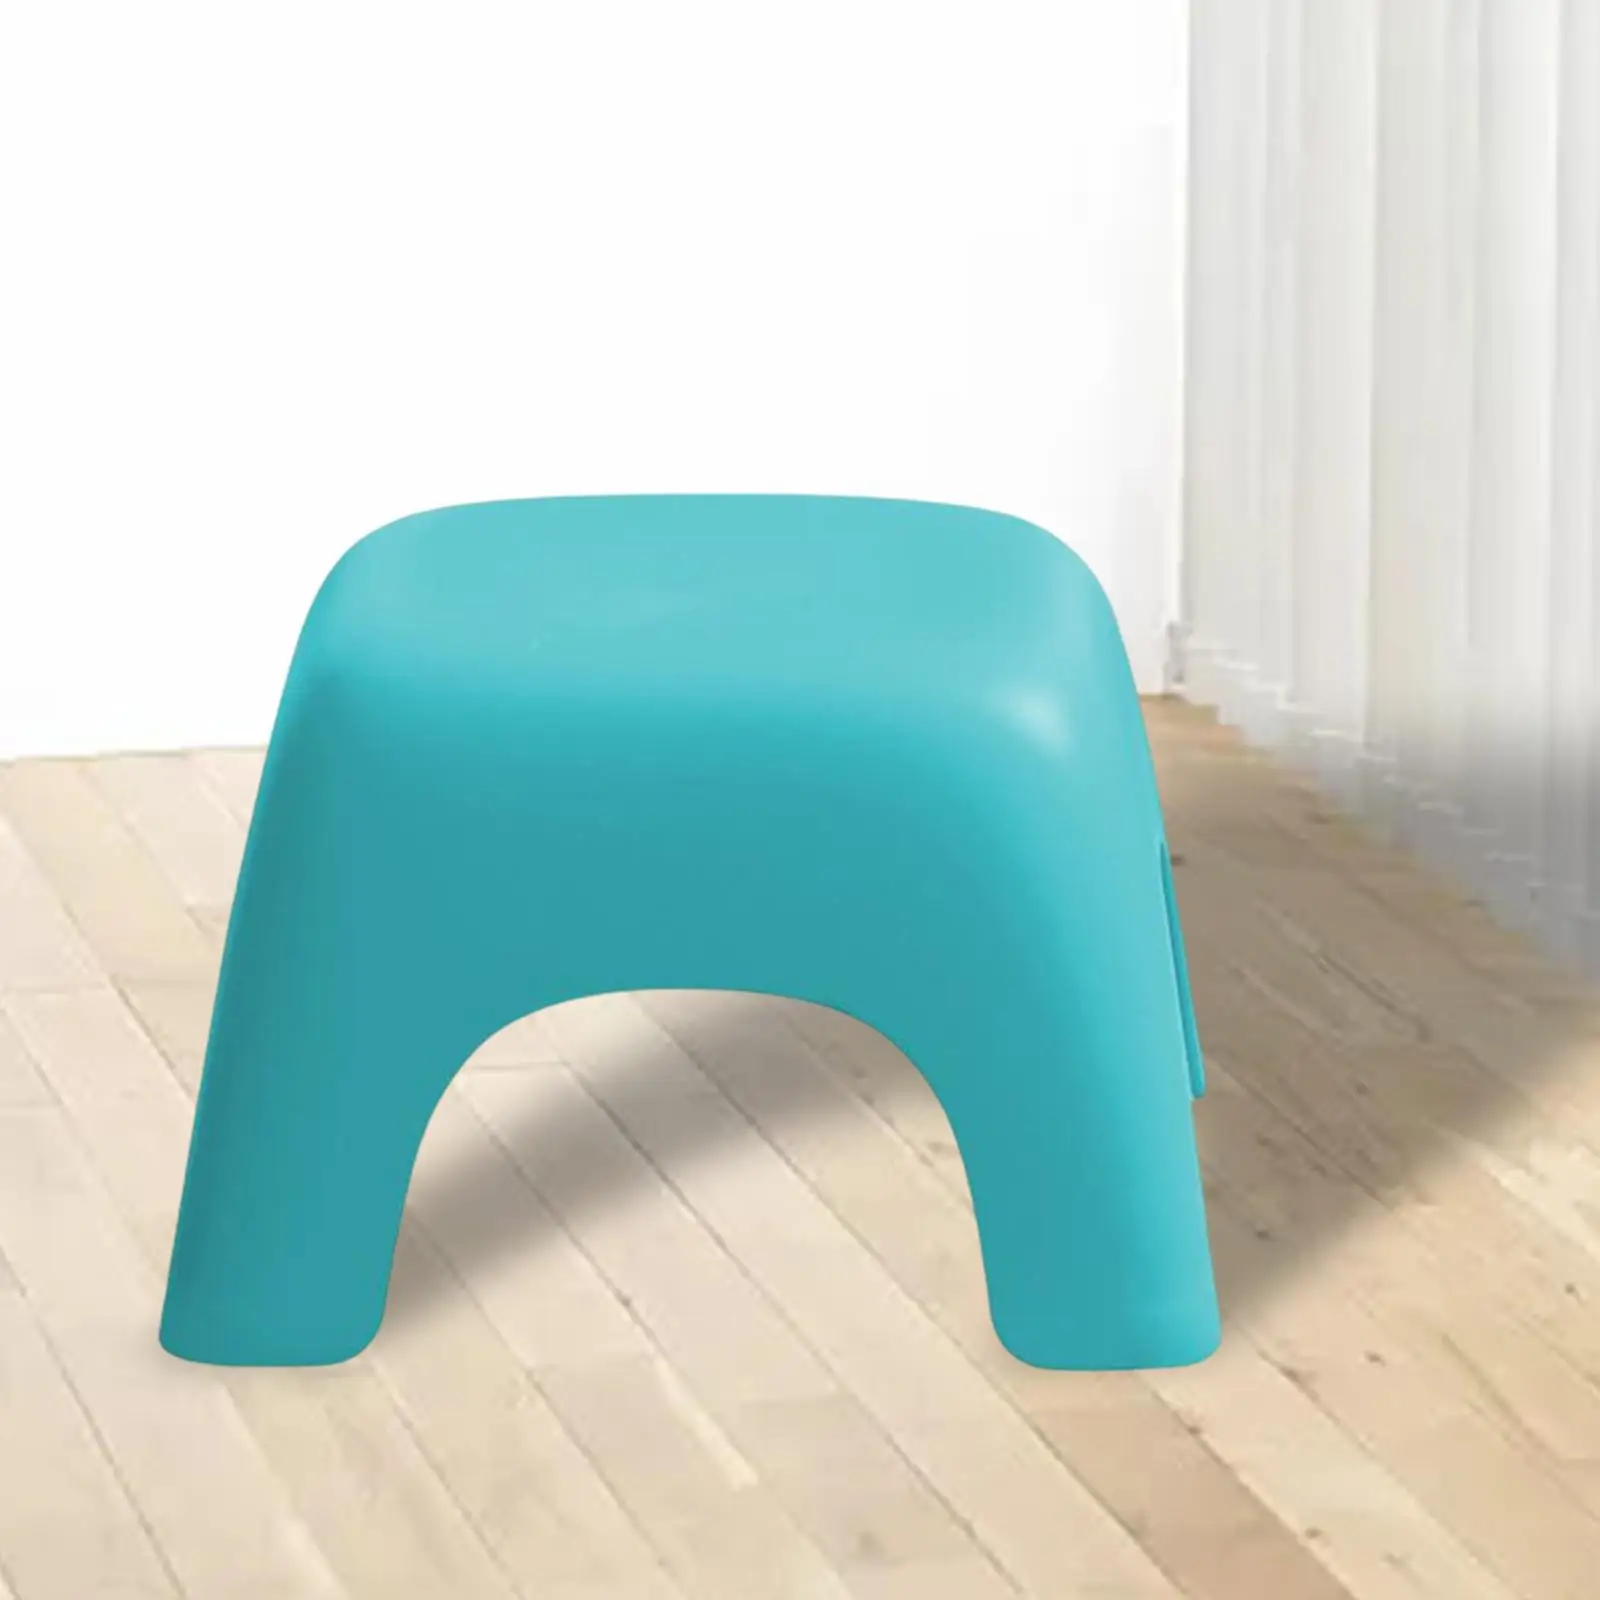 Living Room Small Stool Step Footrest Bench Toy Ottoman Toddler Stool Non Slip Durable Shoe Change Stool Chair for Rooms Kitchen